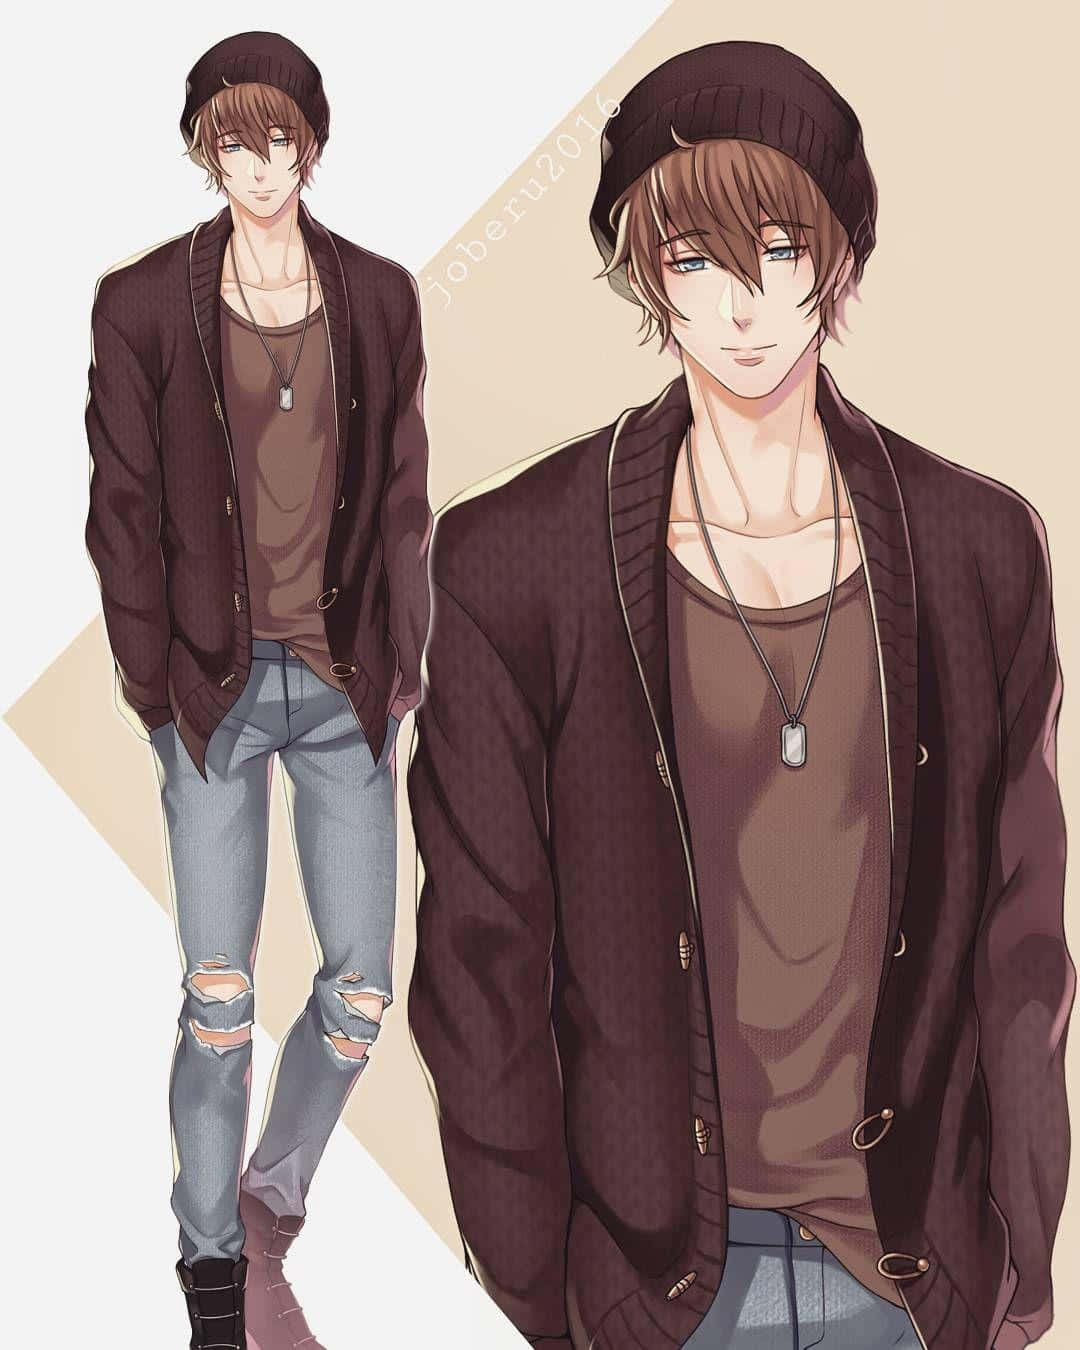 Download A Male Anime Character In A Brown Jacket And Jeans Wallpaper |  Wallpapers.Com